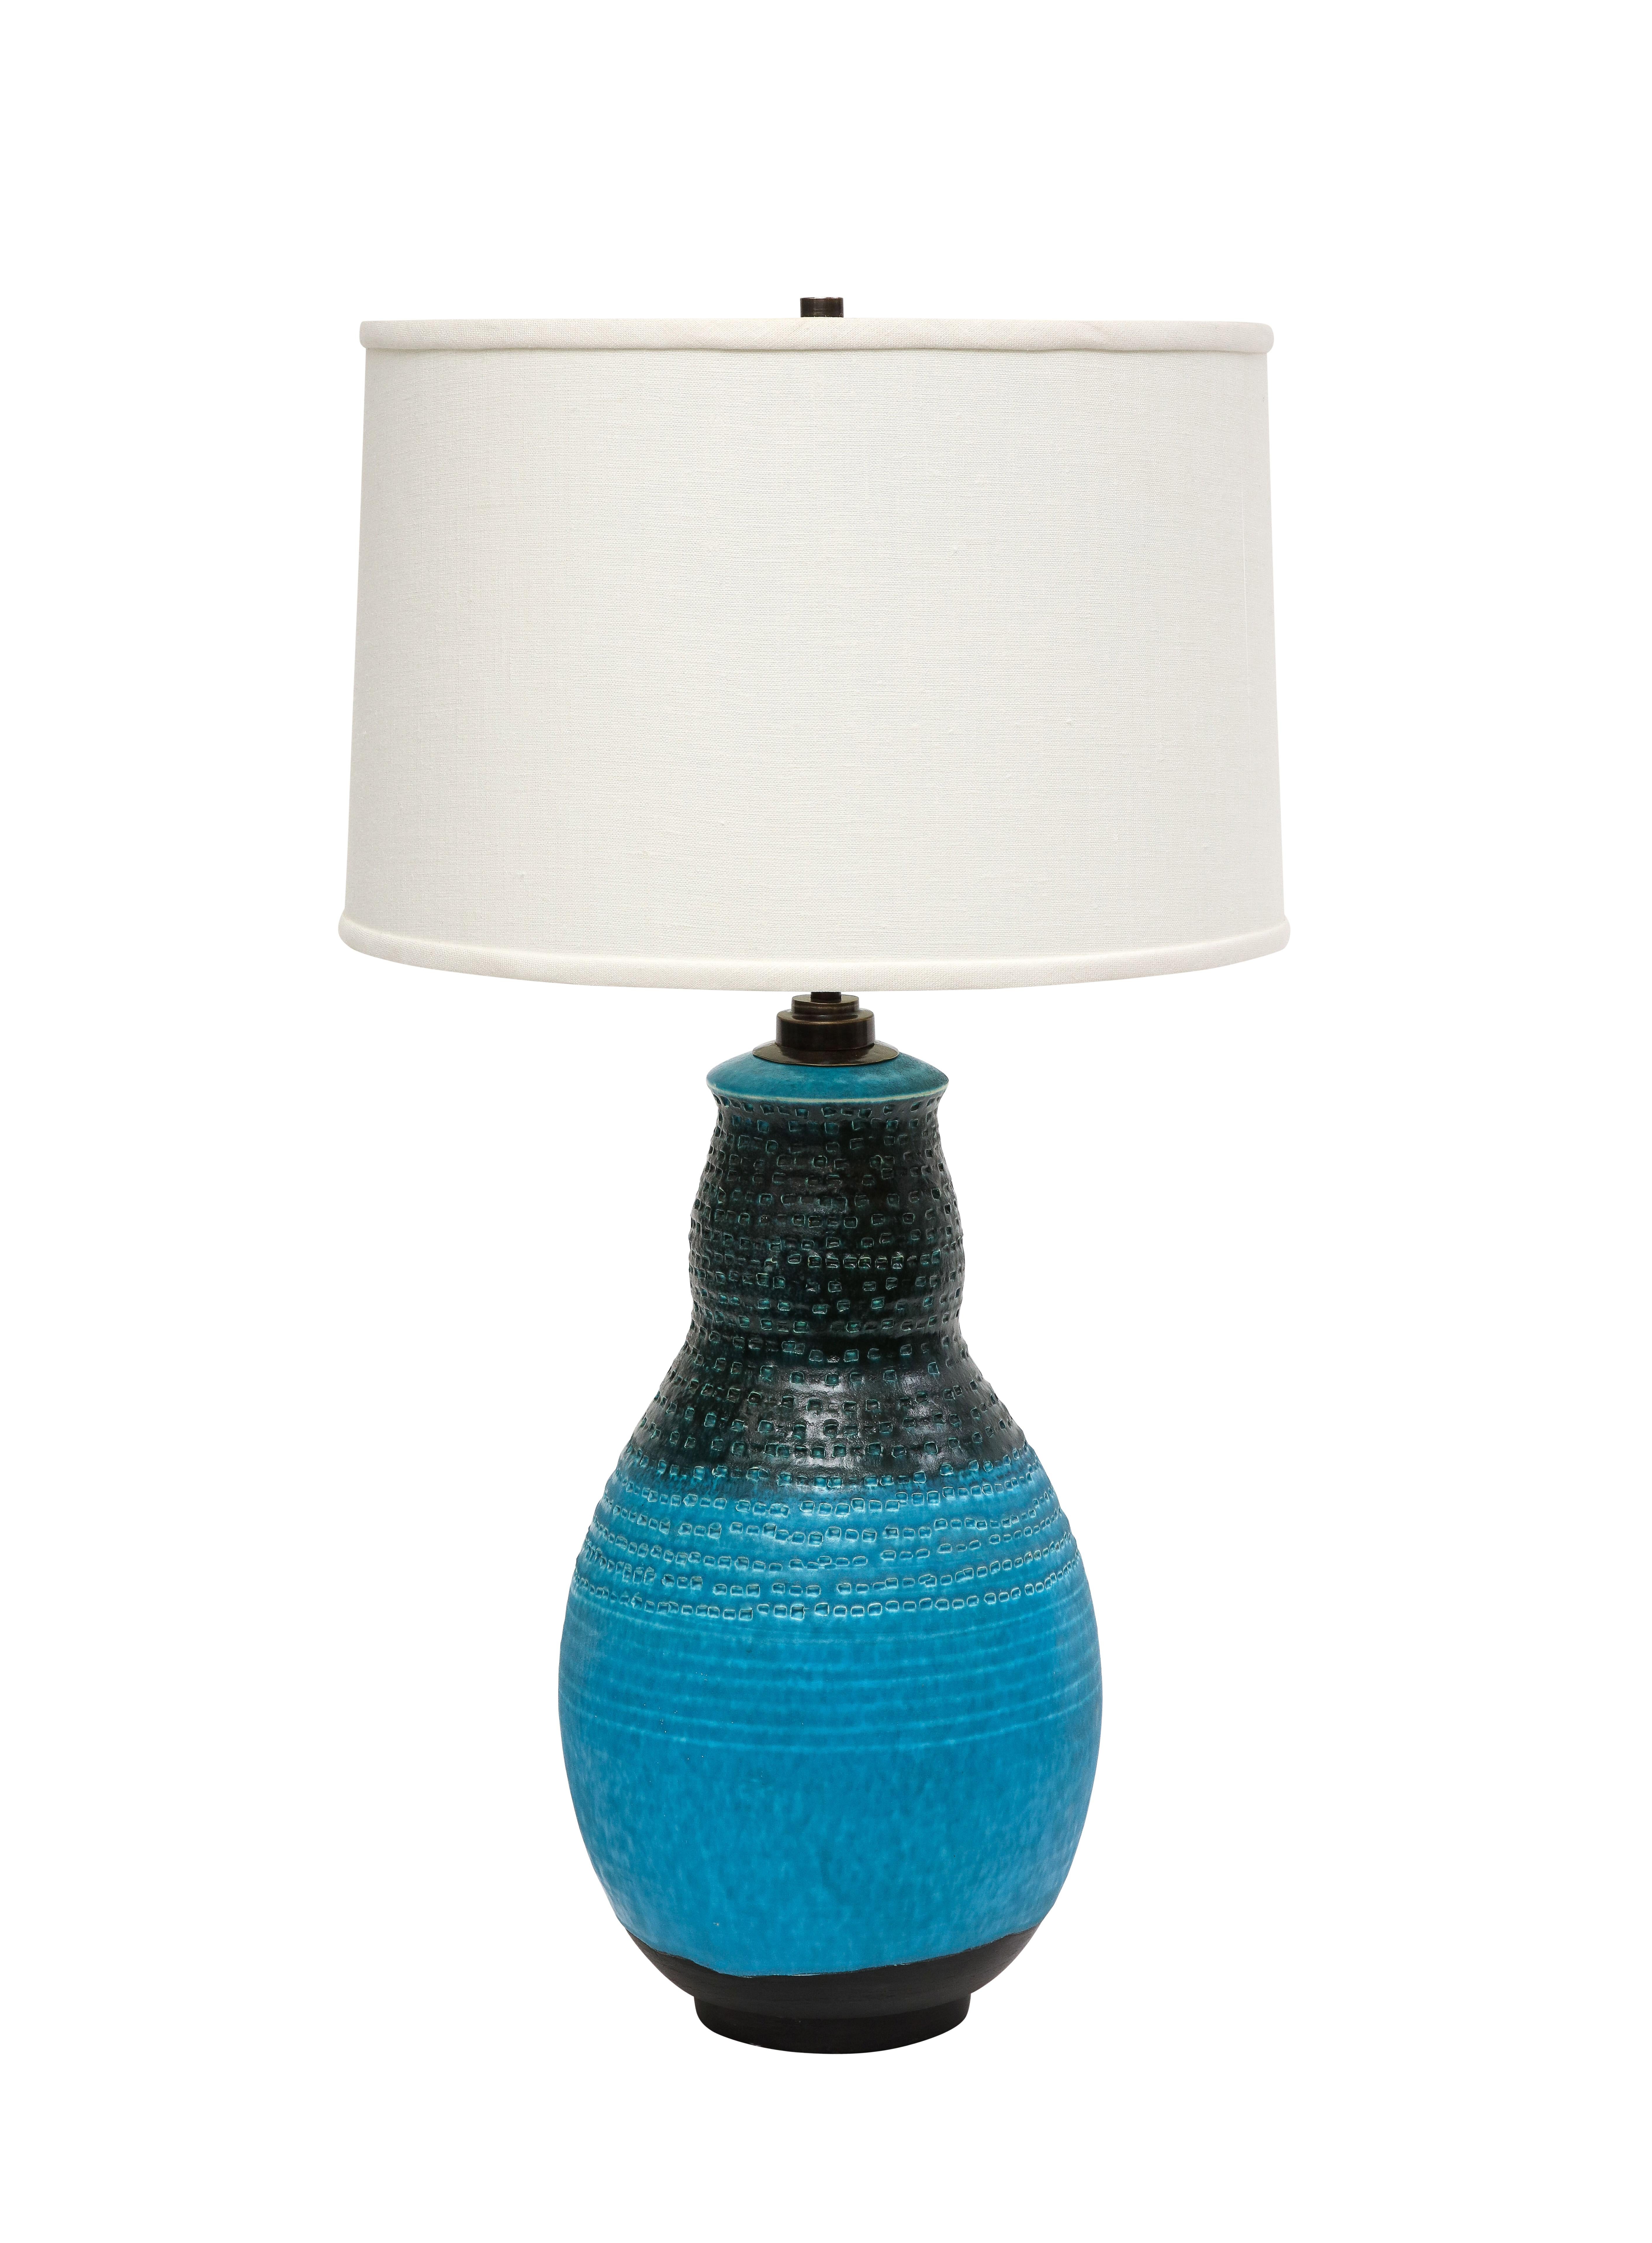 Alvino Bagni table lamp, ceramic, blue, black, impressed. Large gourd form hand thrown pottery lamp with footed base. Glazed in blue and black and decorated with horizontal rows of hand tooled rectangular impressions. The electrical fittings were